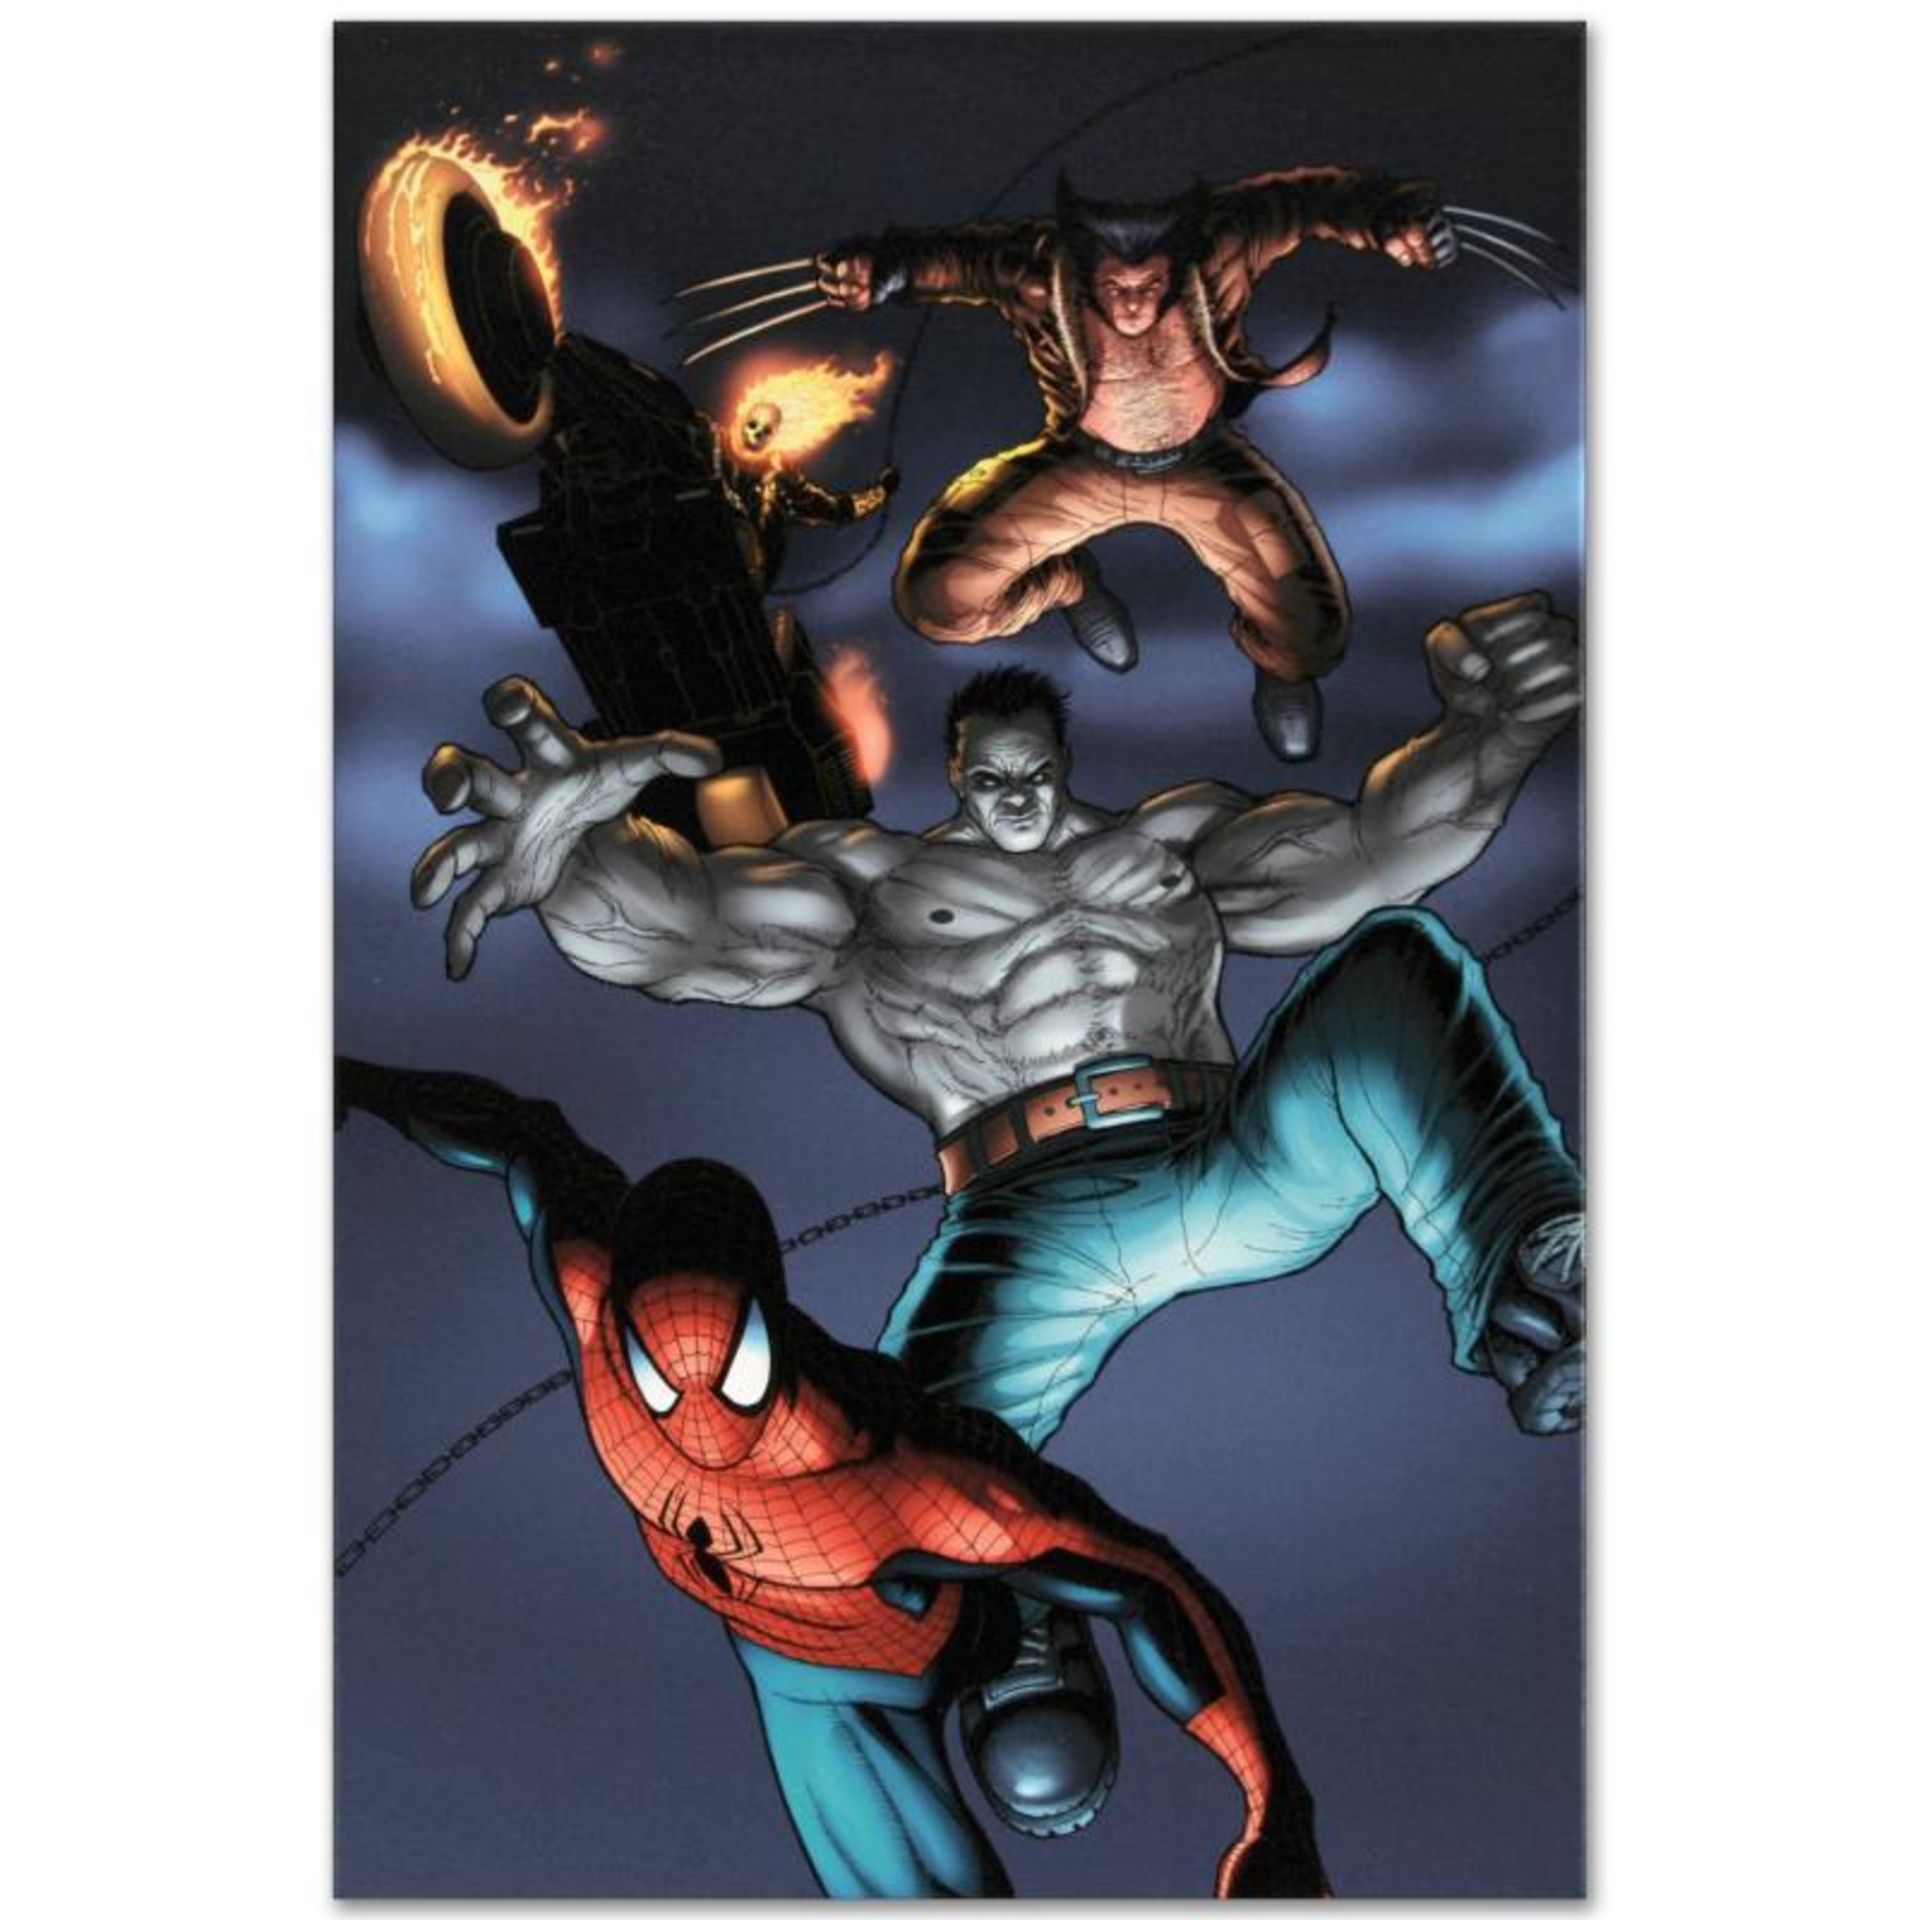 Marvel Comics "Fear Itself: Fearsome Four #2" Numbered Limited Edition Giclee on